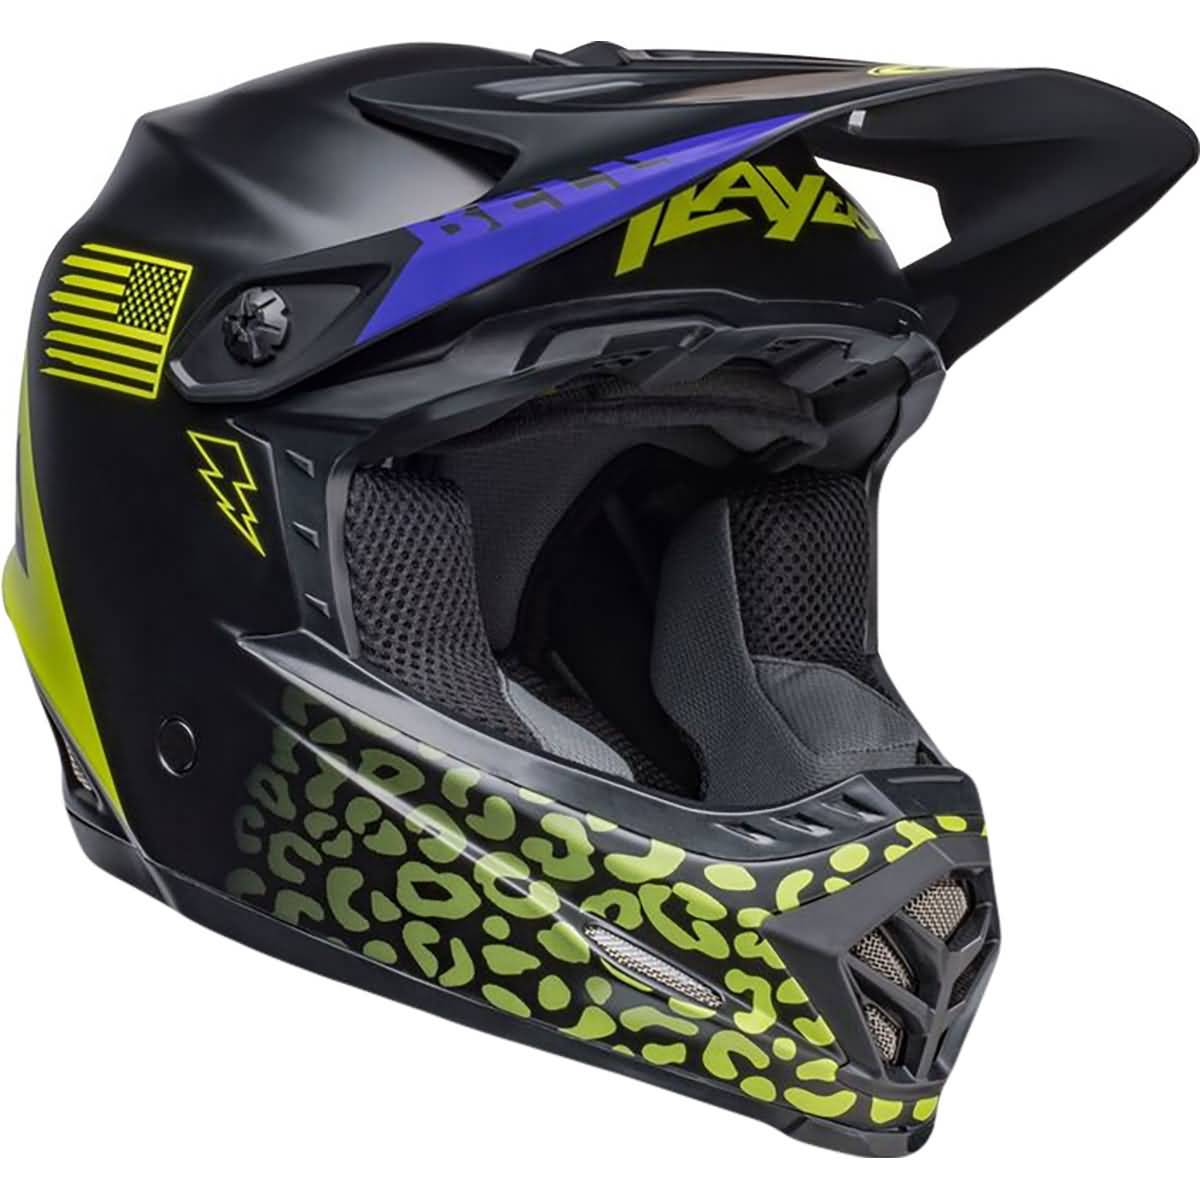 Bell Moto-9 Slayco MIPS Youth Off-Road Helmets-7136590